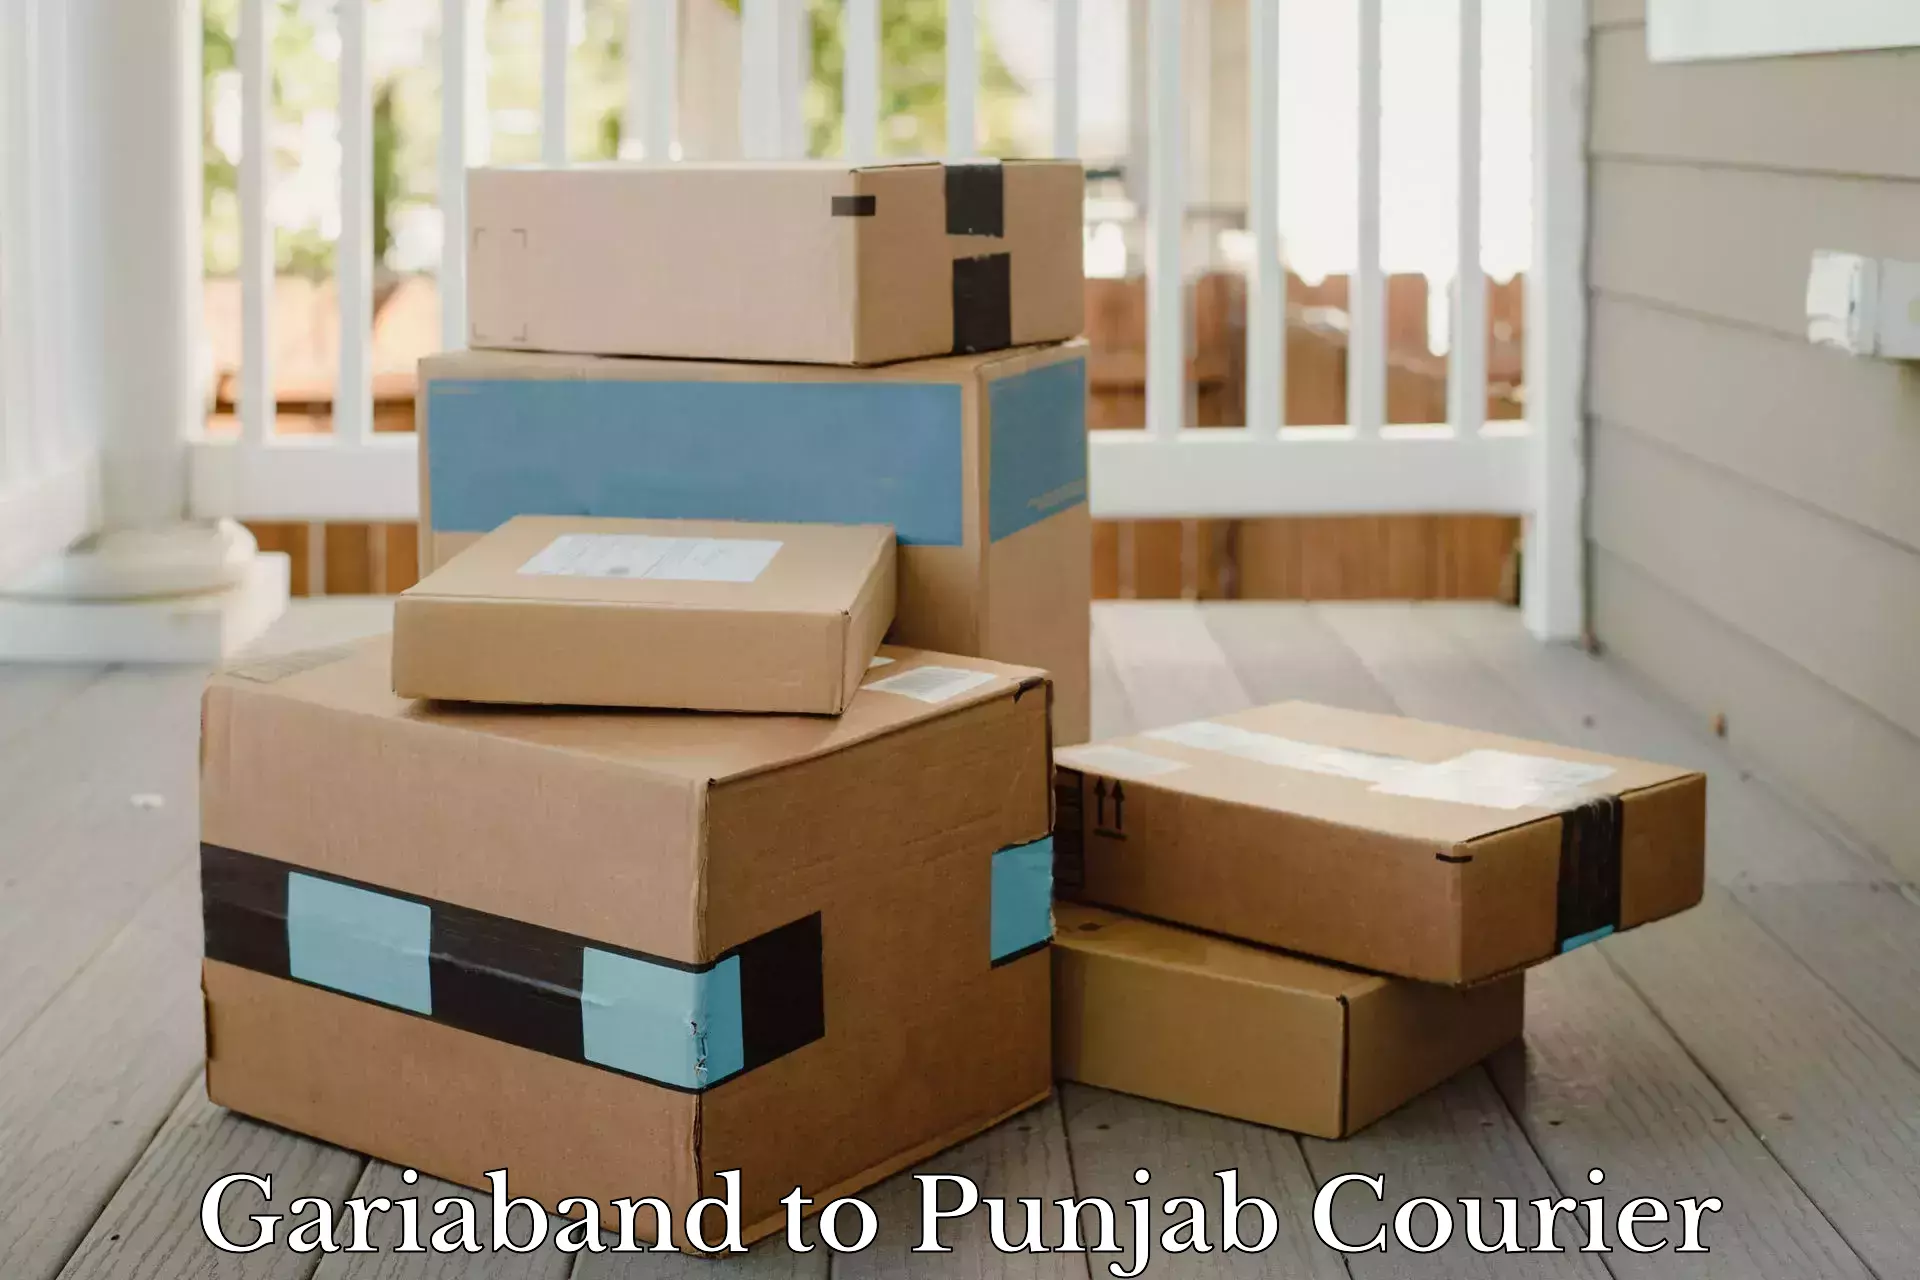 Premium courier services in Gariaband to Punjab